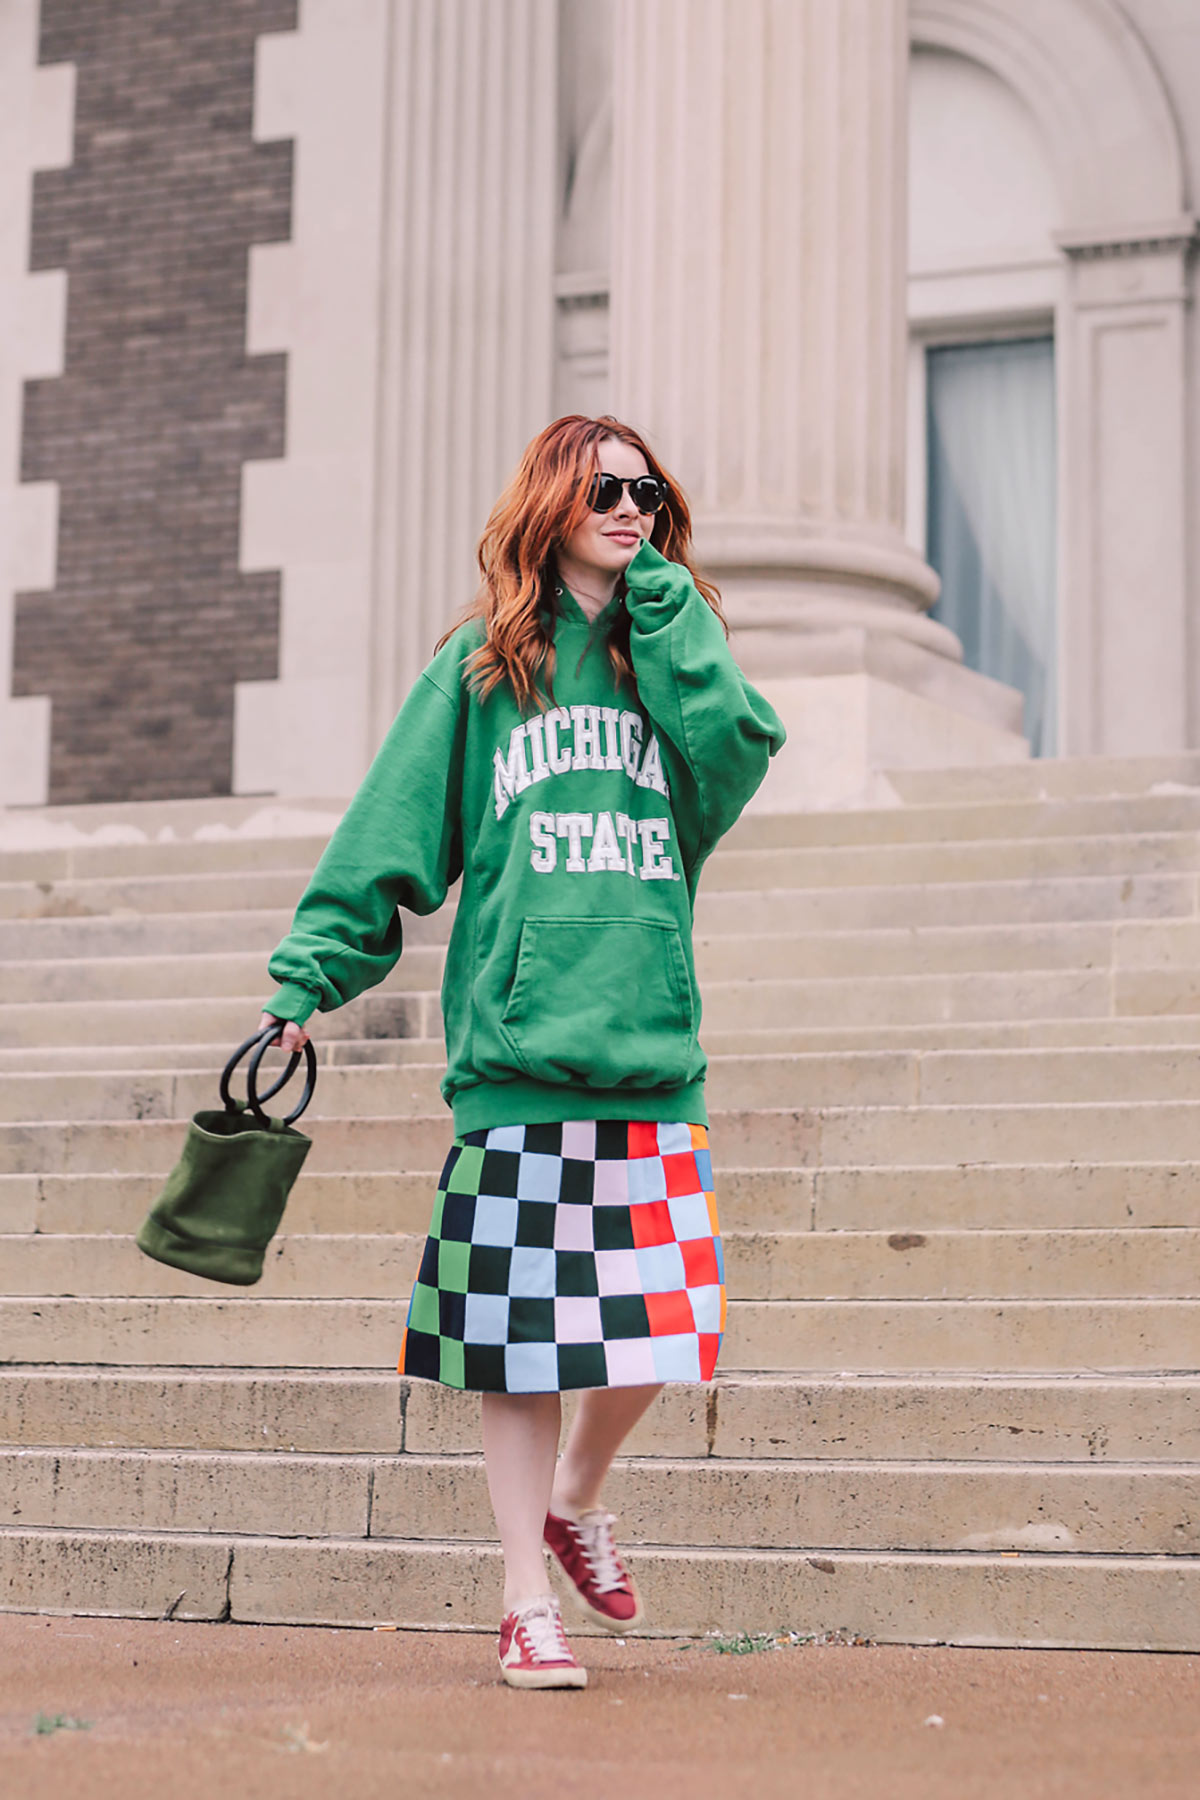 Saucer Every year Farthest Sweatshirt Style: 5 New Styling Ideas for A Closet Staple - Sea of Shoes